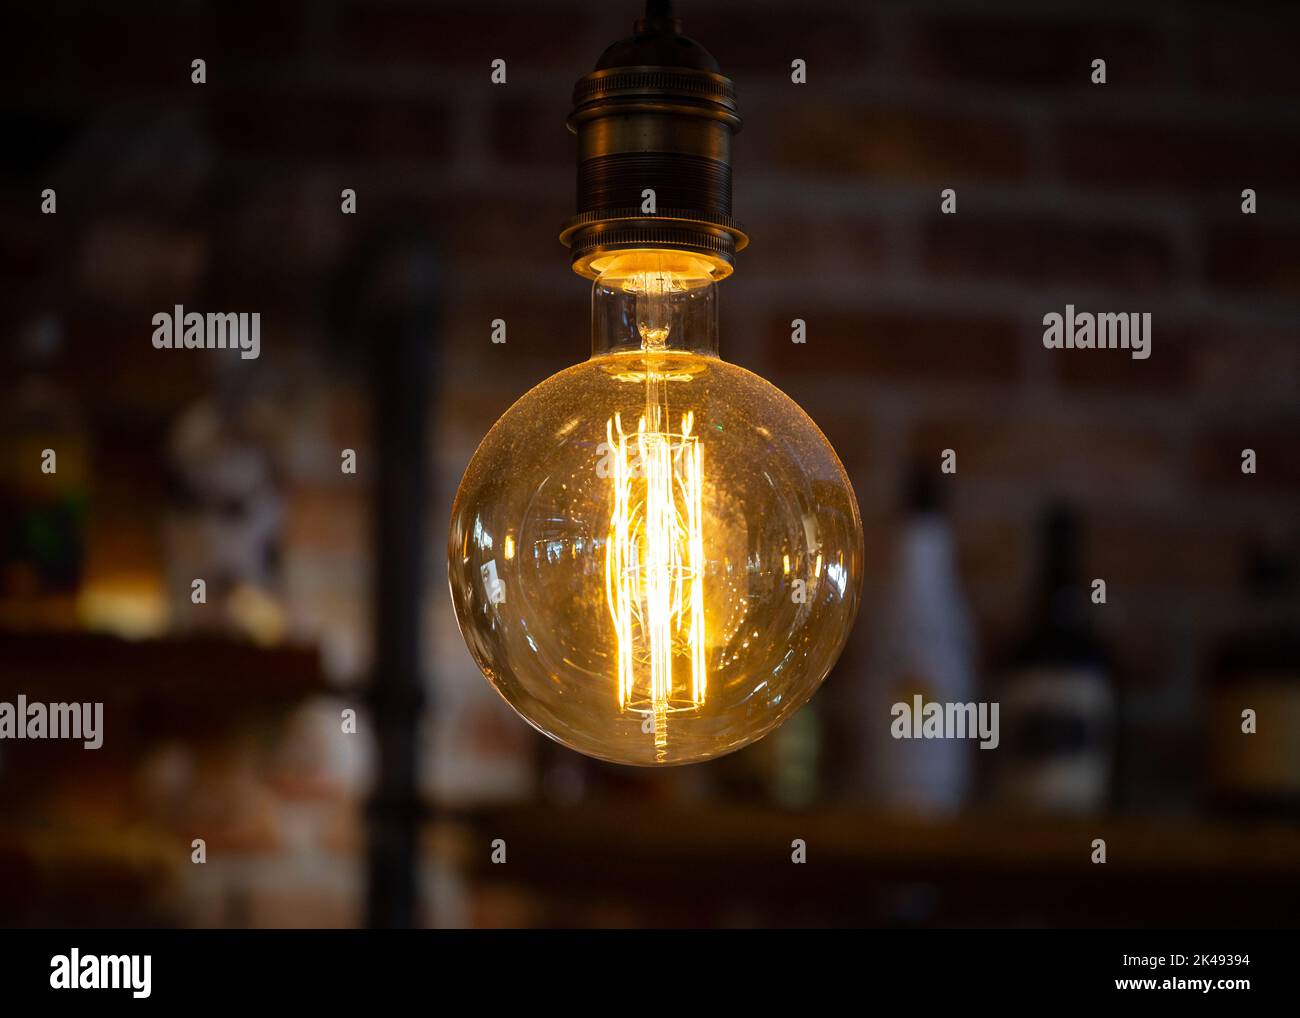 Light bulb with low energy filament illuminated lit up in dark room creating glowing light. Stock Photo